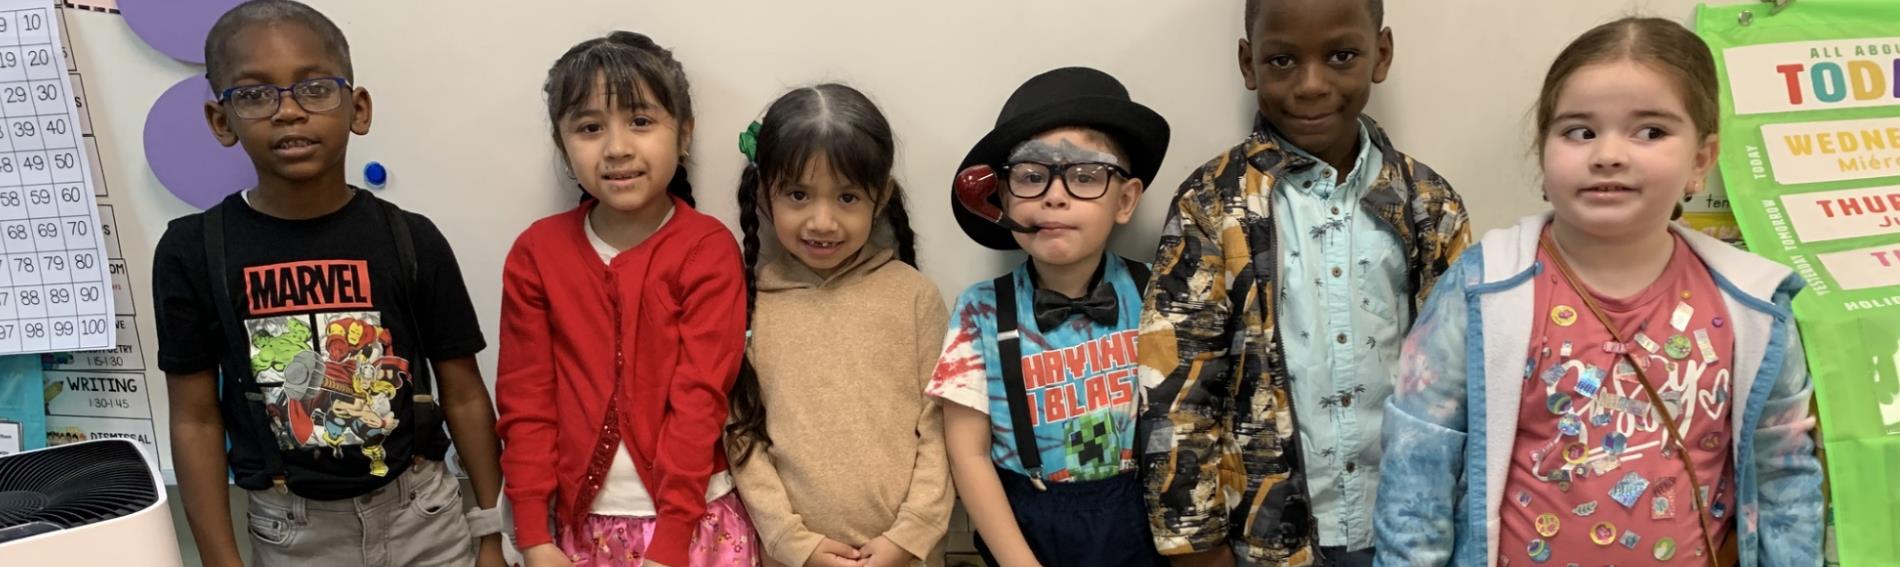 Elementary Students in Costumes